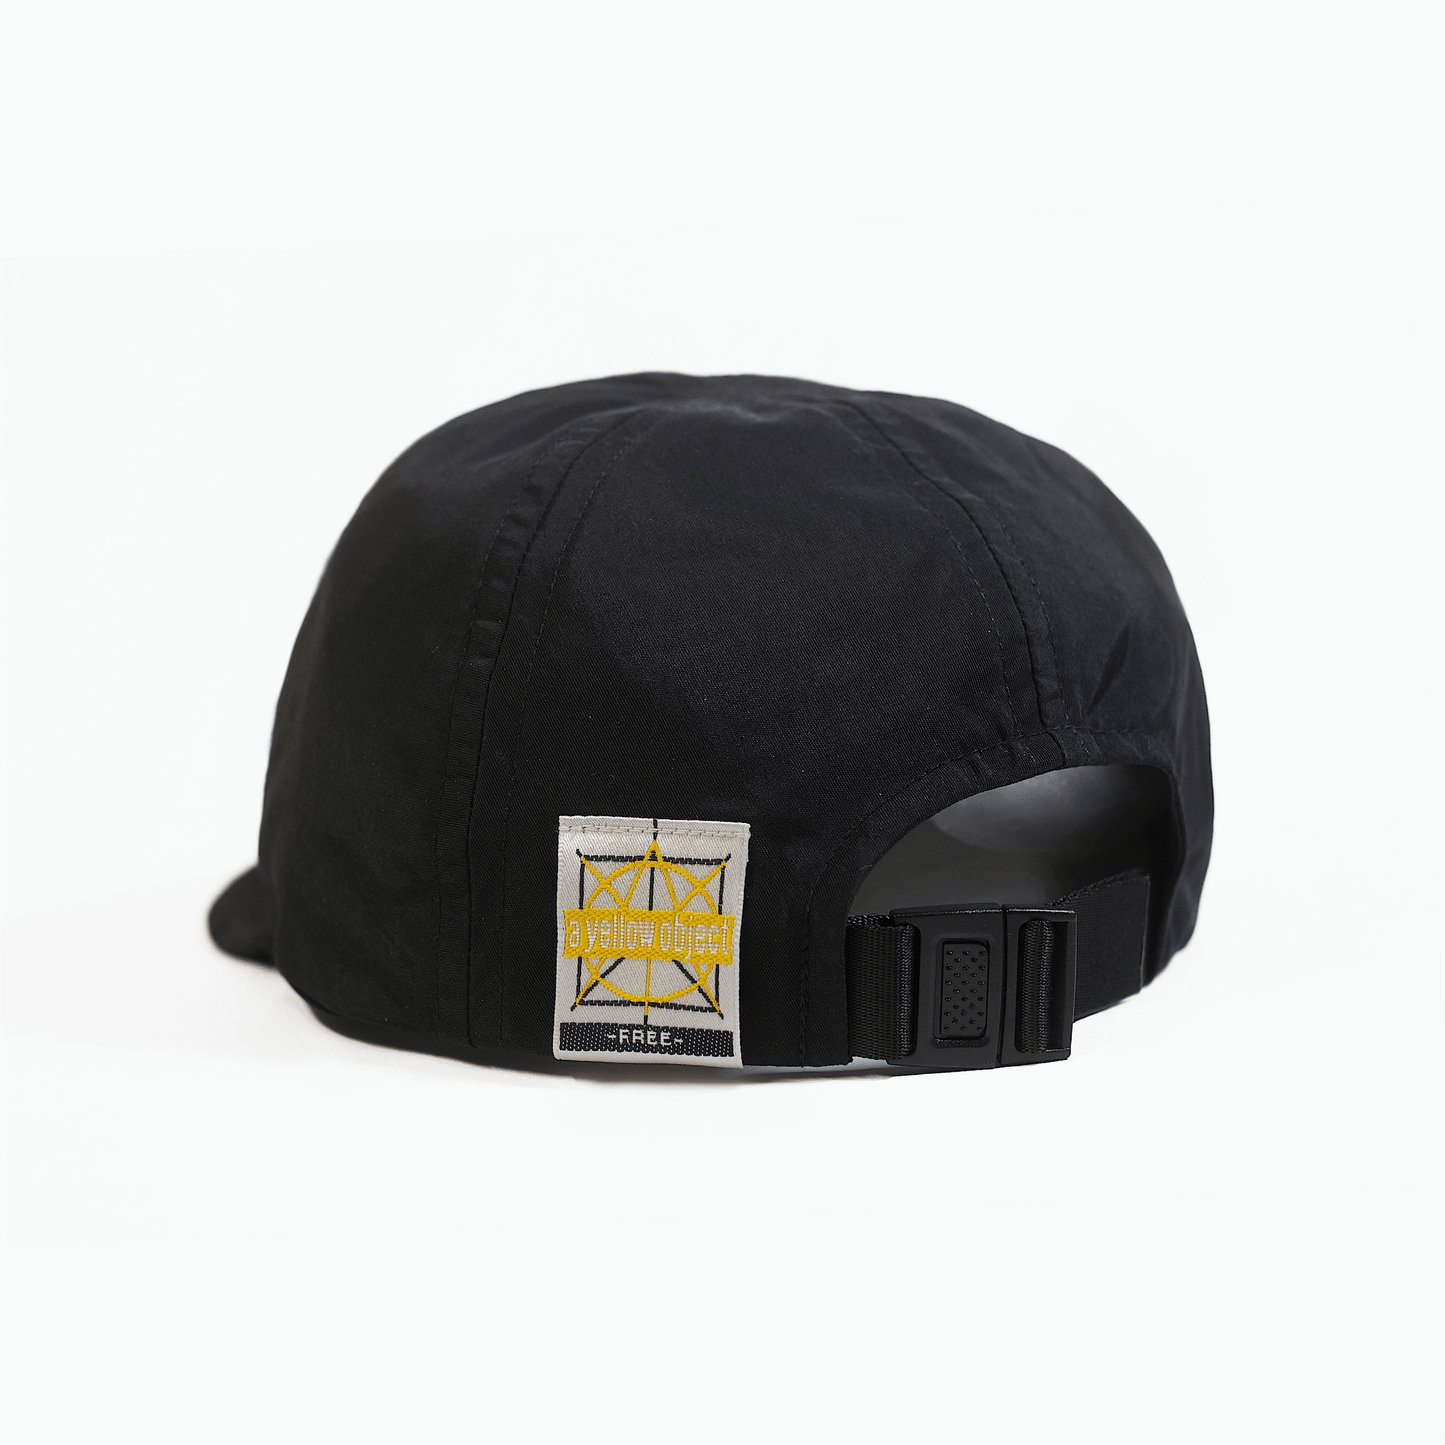 Just A Cap (Black) - A Yellow Object